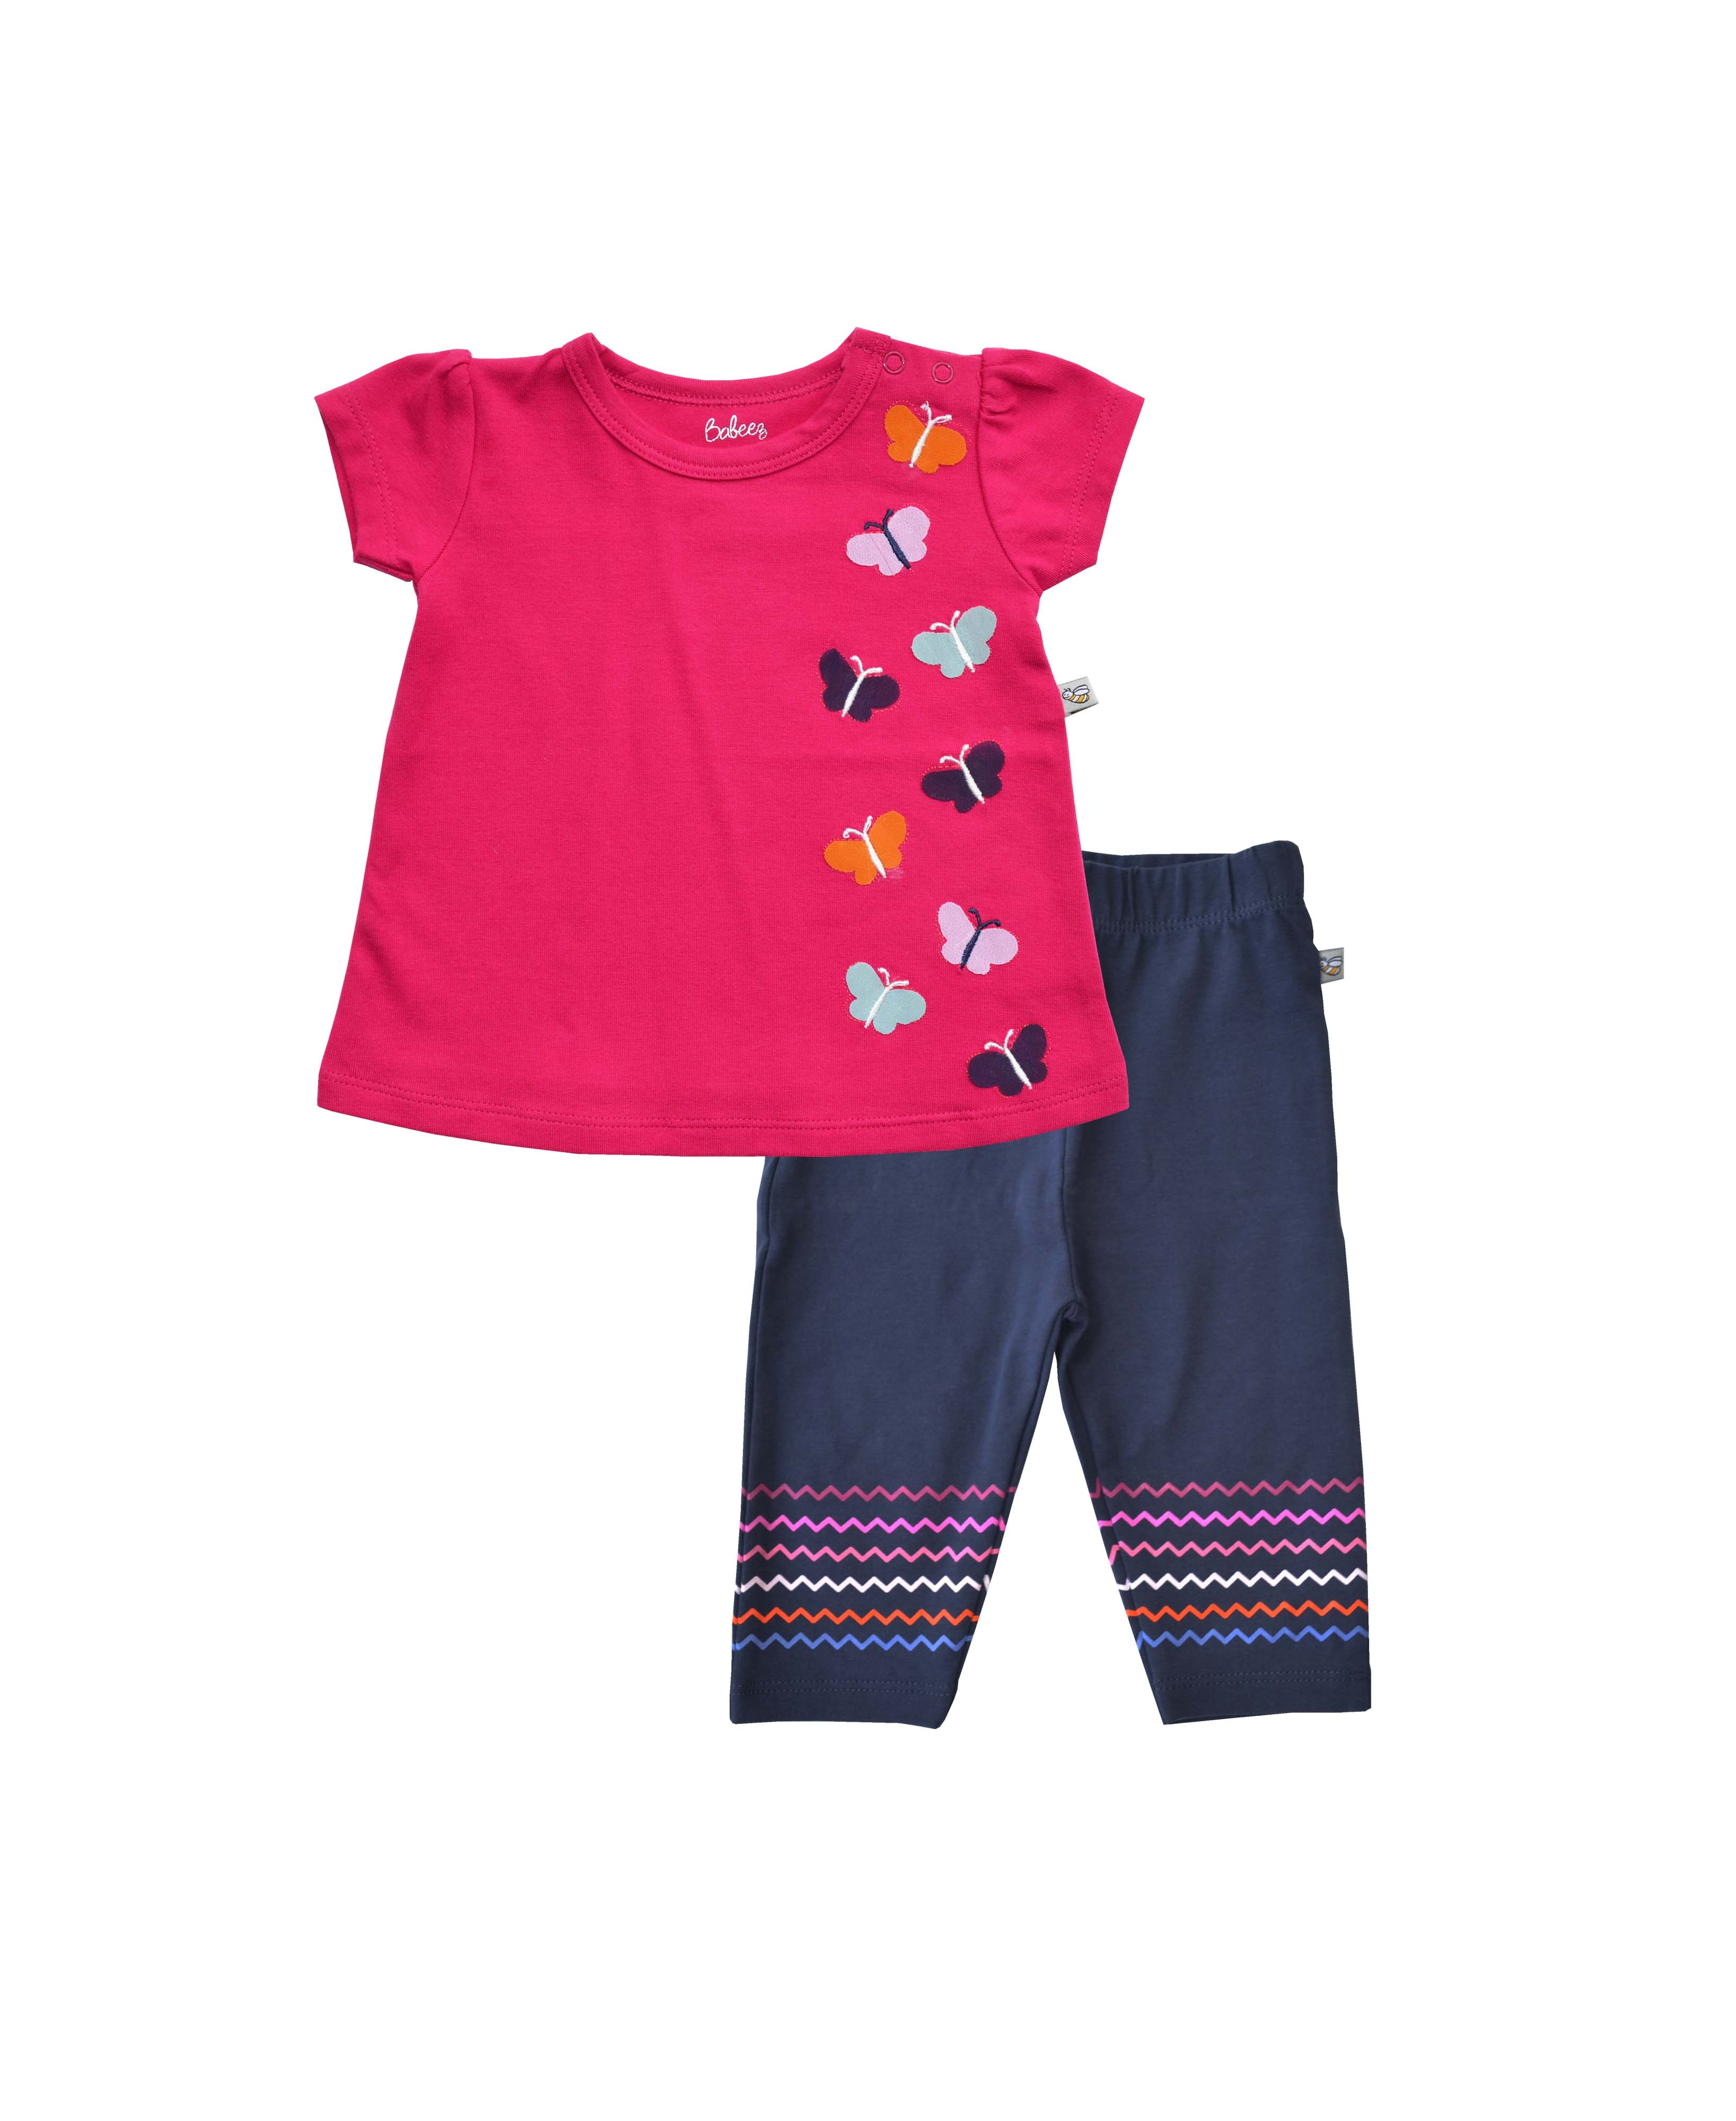 Butterfly Applique on Pink Short Sleeves Top and Navy Legging with Wave Print at Bottom (95%Cotton 5%Elasthan Jersey)